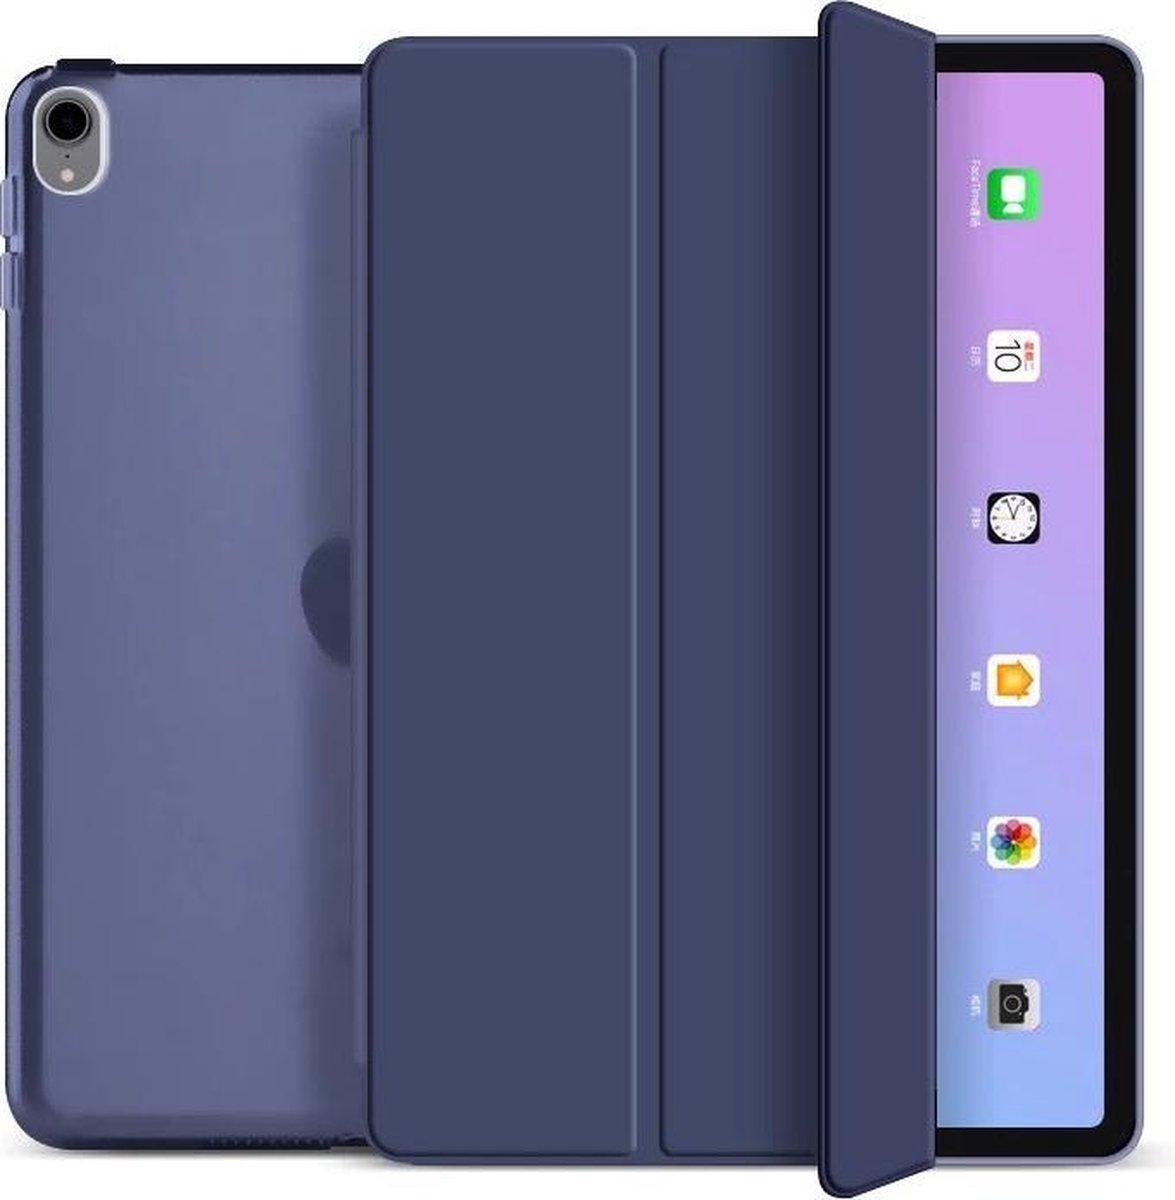 Hoes geschikt voor Apple iPad Air 2020/2022 - Smart Tri-Fold Transparante Hard Case – Blauw -papierachtig - Screenprotector - Apple - iPad Air 4 - iPad Hoesje - Ipad Case - Ipad Hoes - Autowake - Magnetic - Tri-fold - Tablethoes – Smartcase